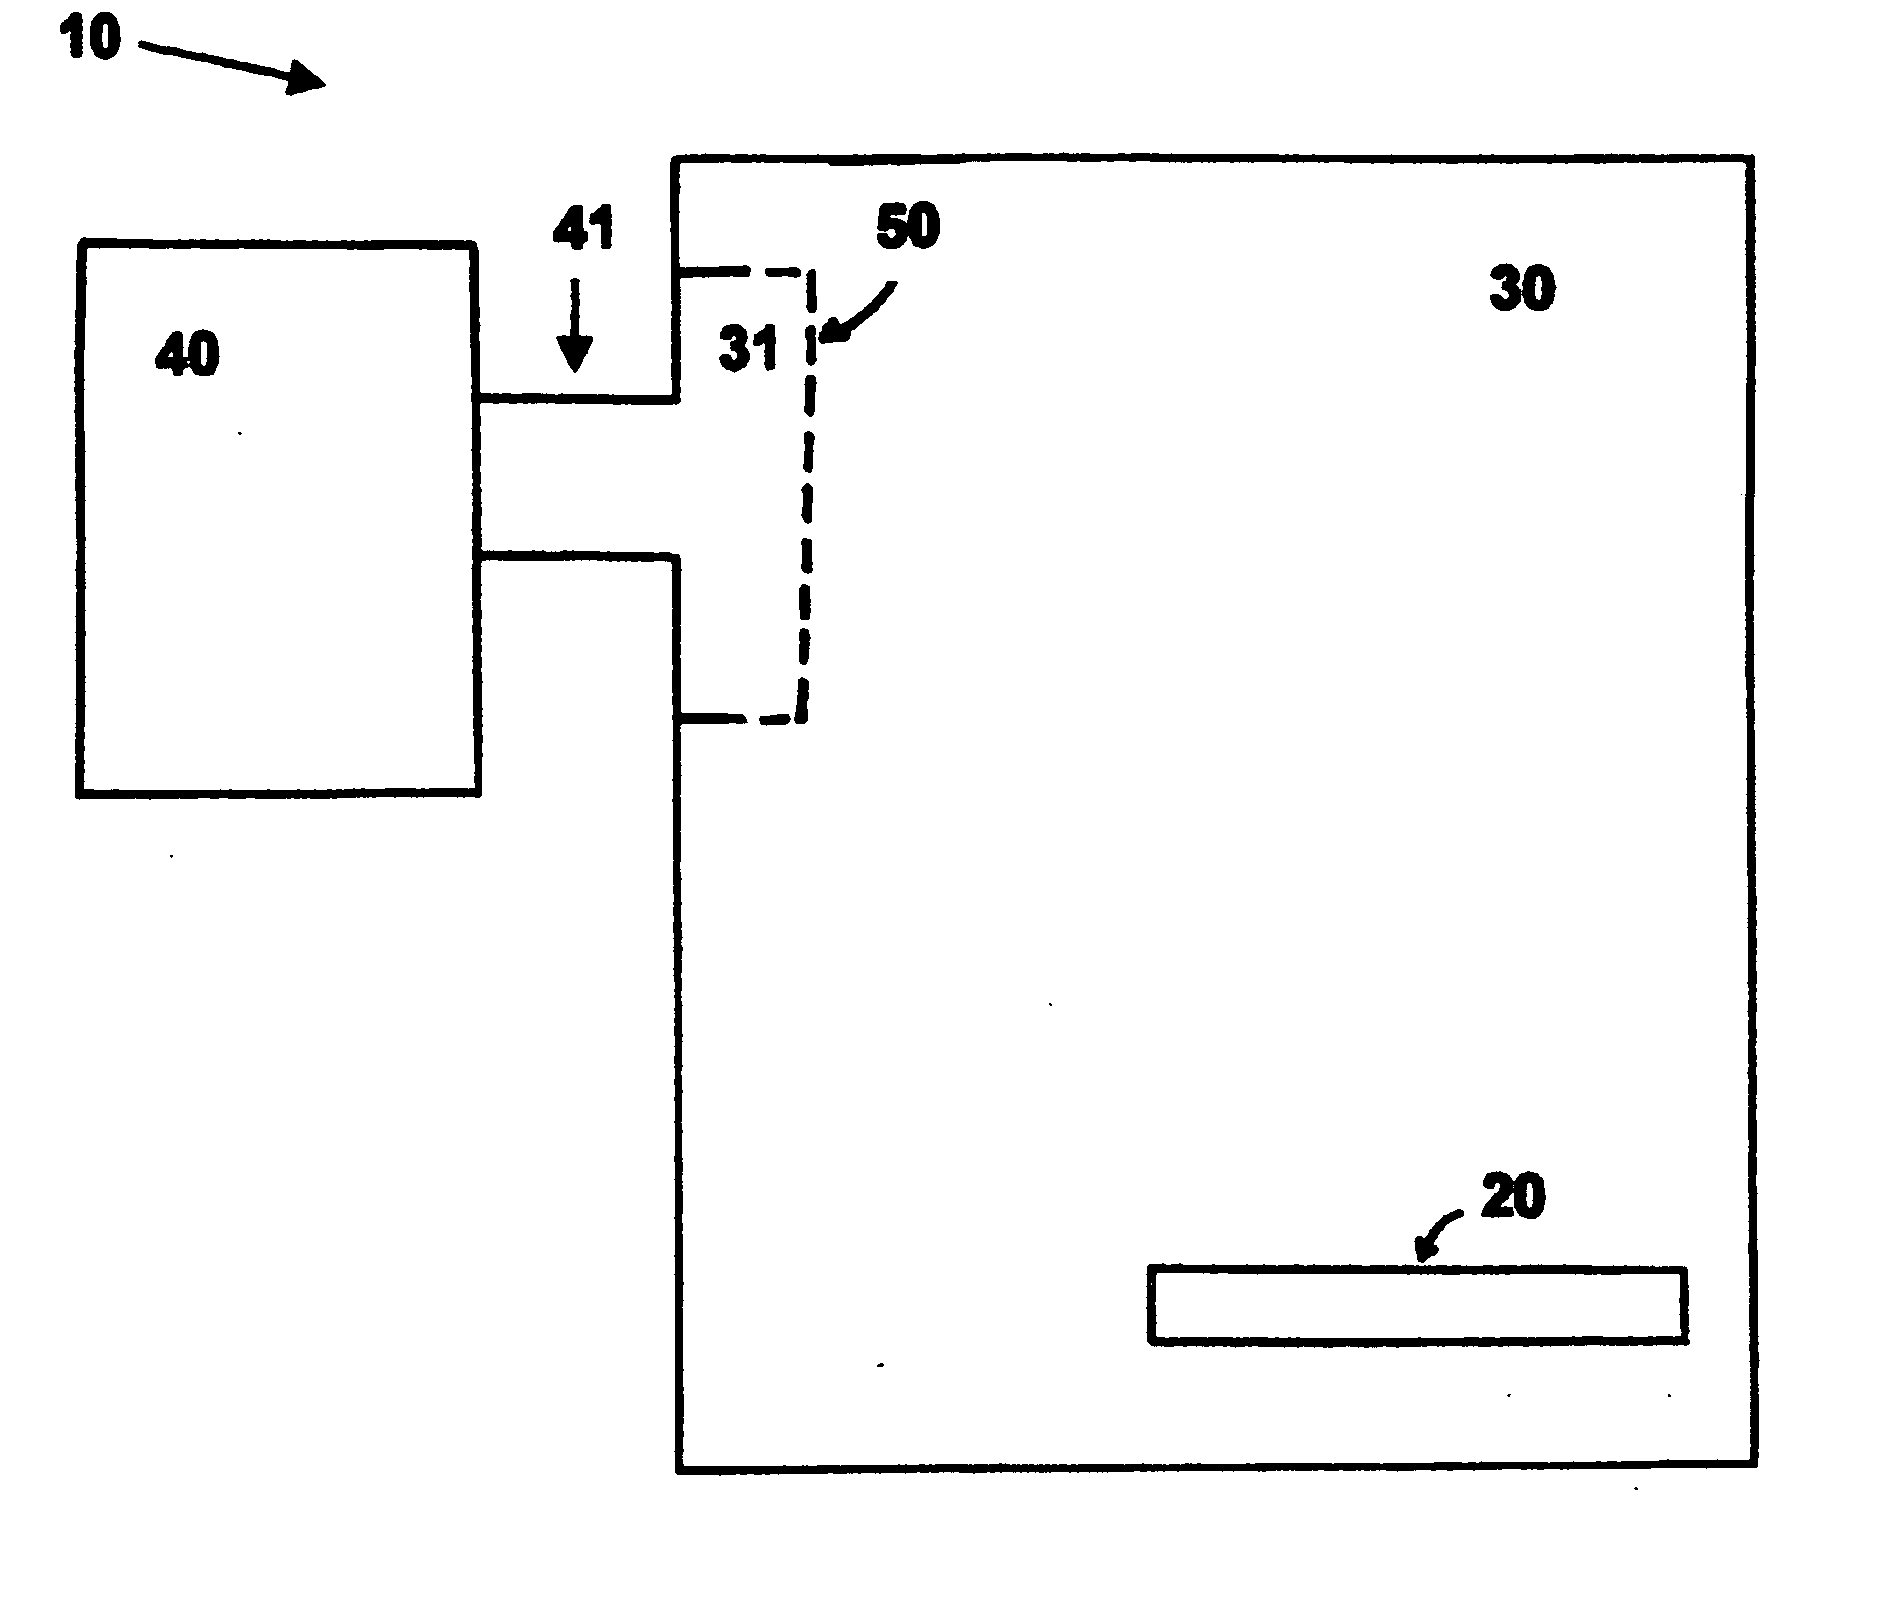 Apparatus and method for microwave processing of materials